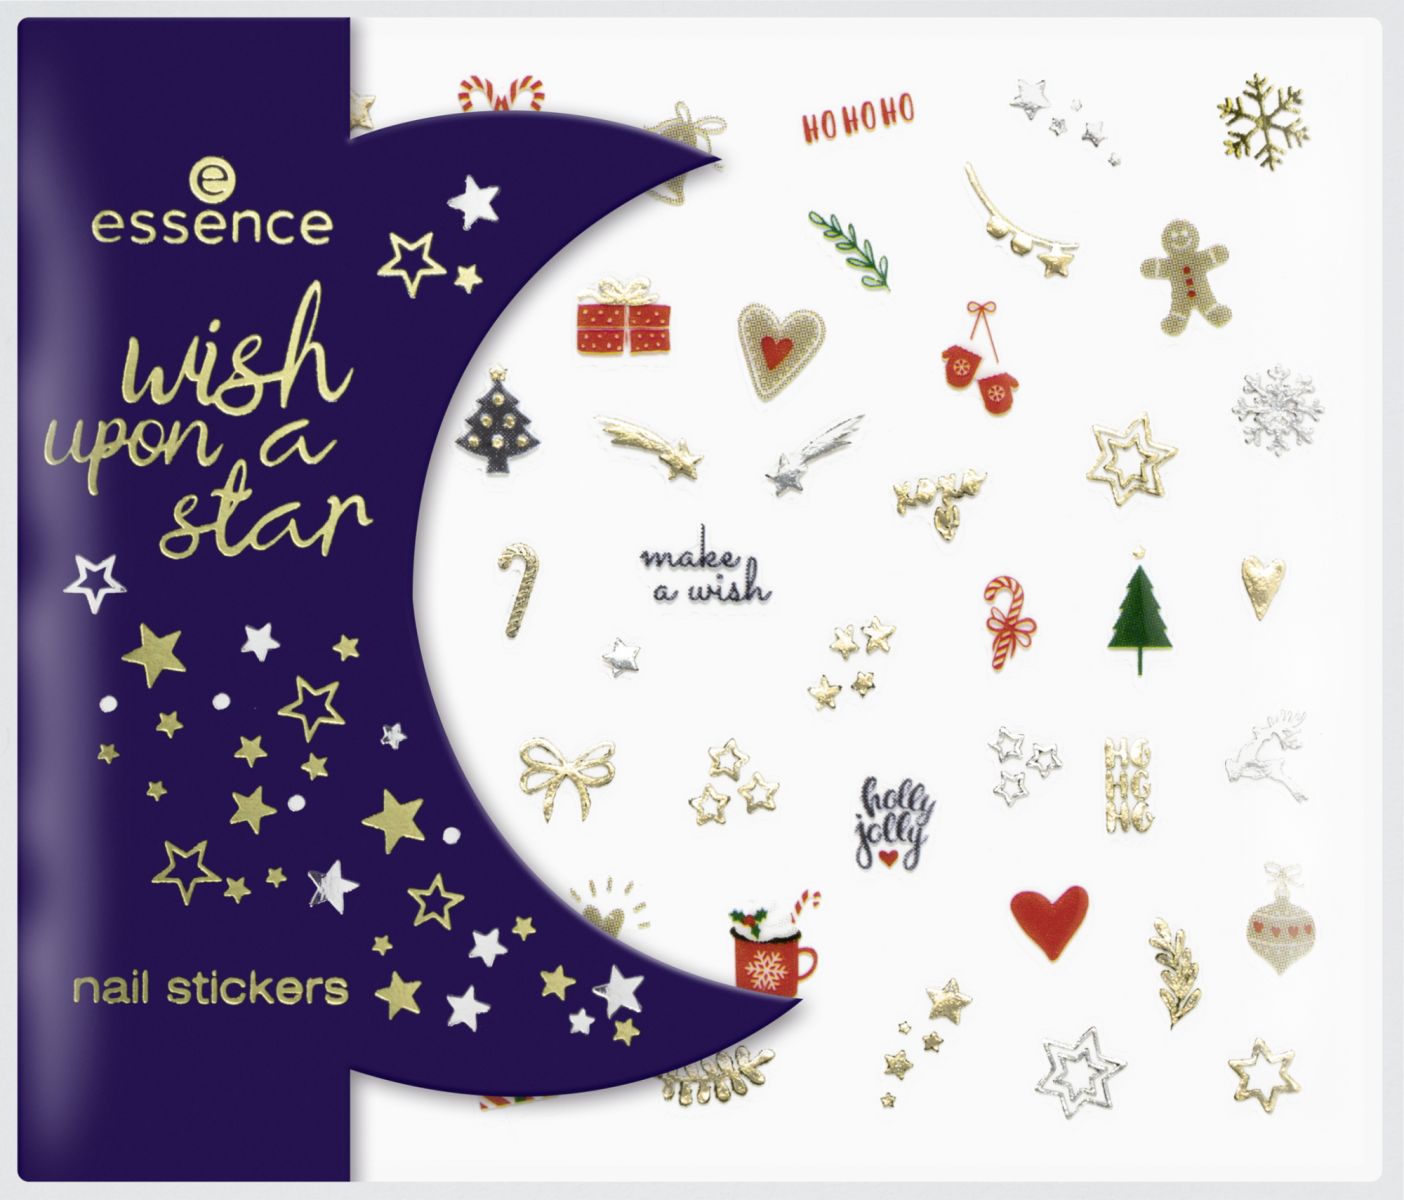 4059729342089 essence wish upon a star nail stickers 01 Image Front View Closed png